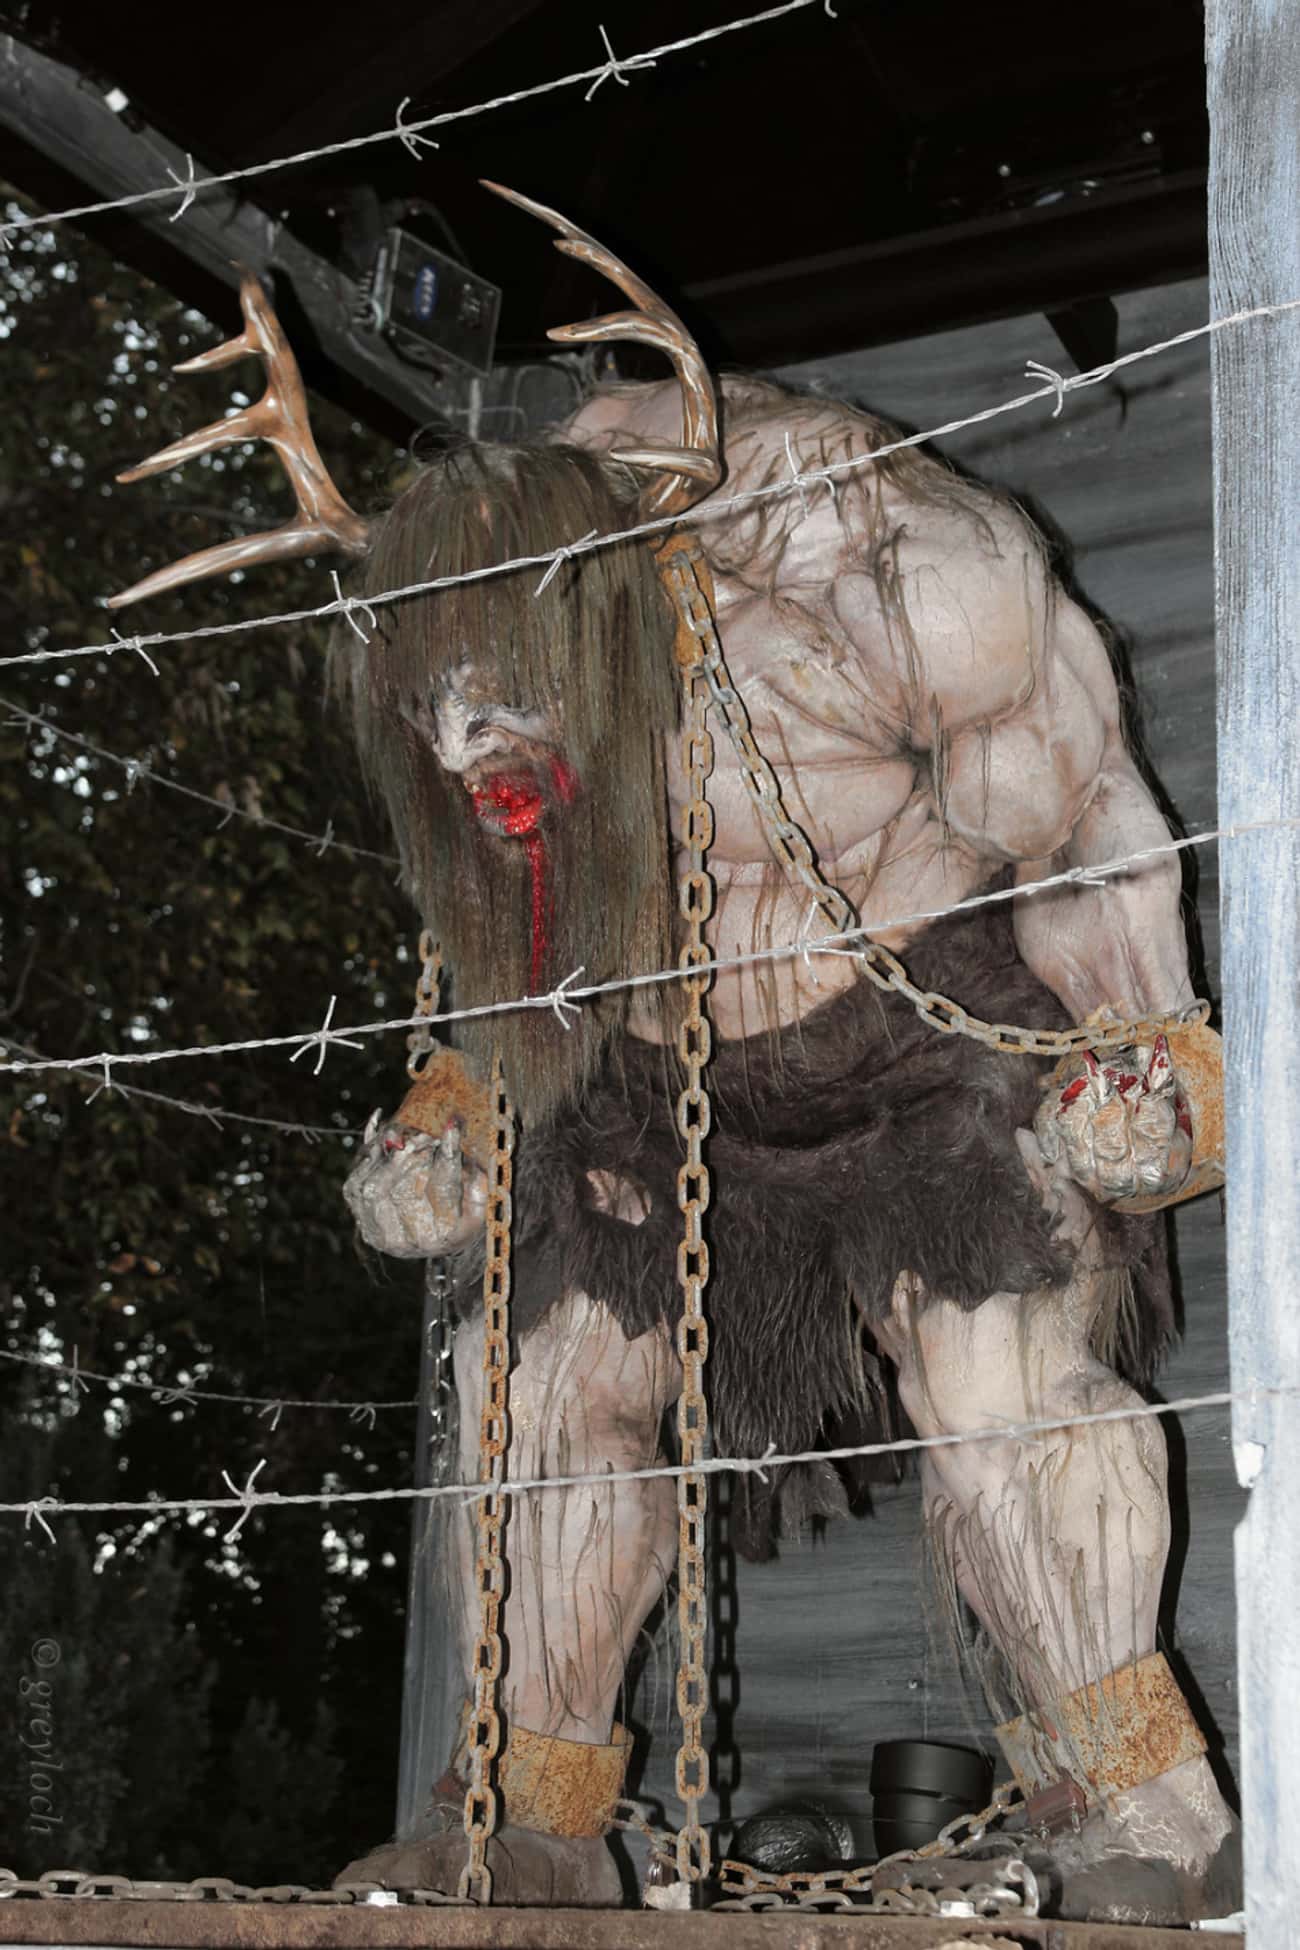 No Matter How Much A Wendigo Consumes, Its Hunger Is Never Sated